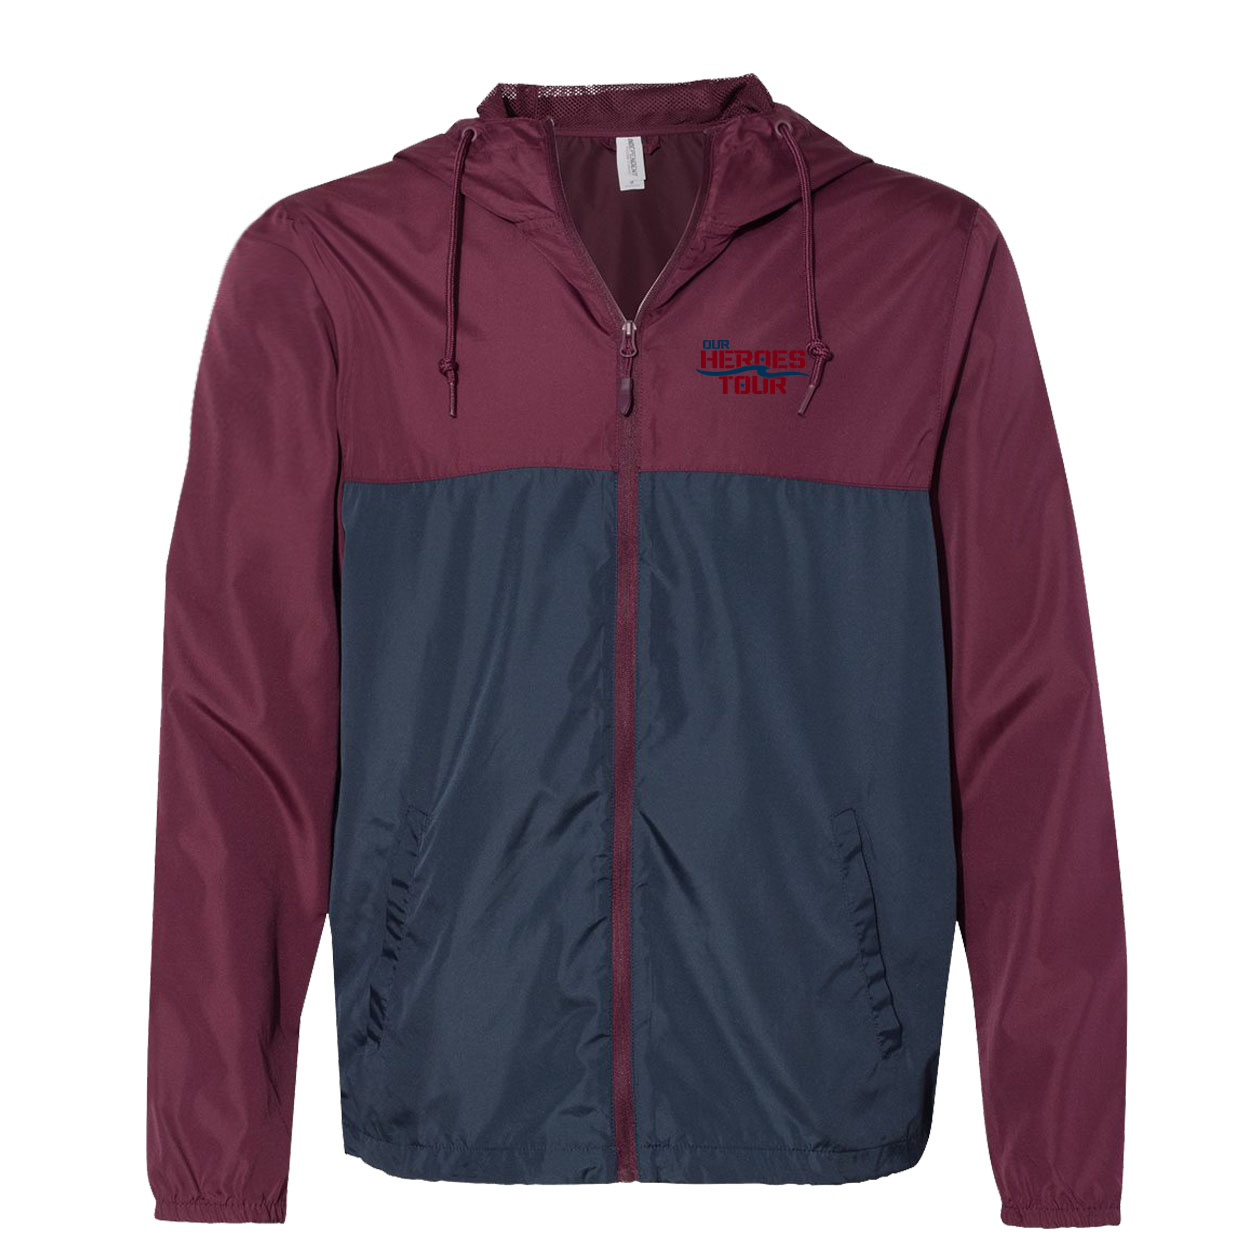 Our Heroes Tour Night Out Lightweight Windbreaker Maroon/Navy (White Logo)